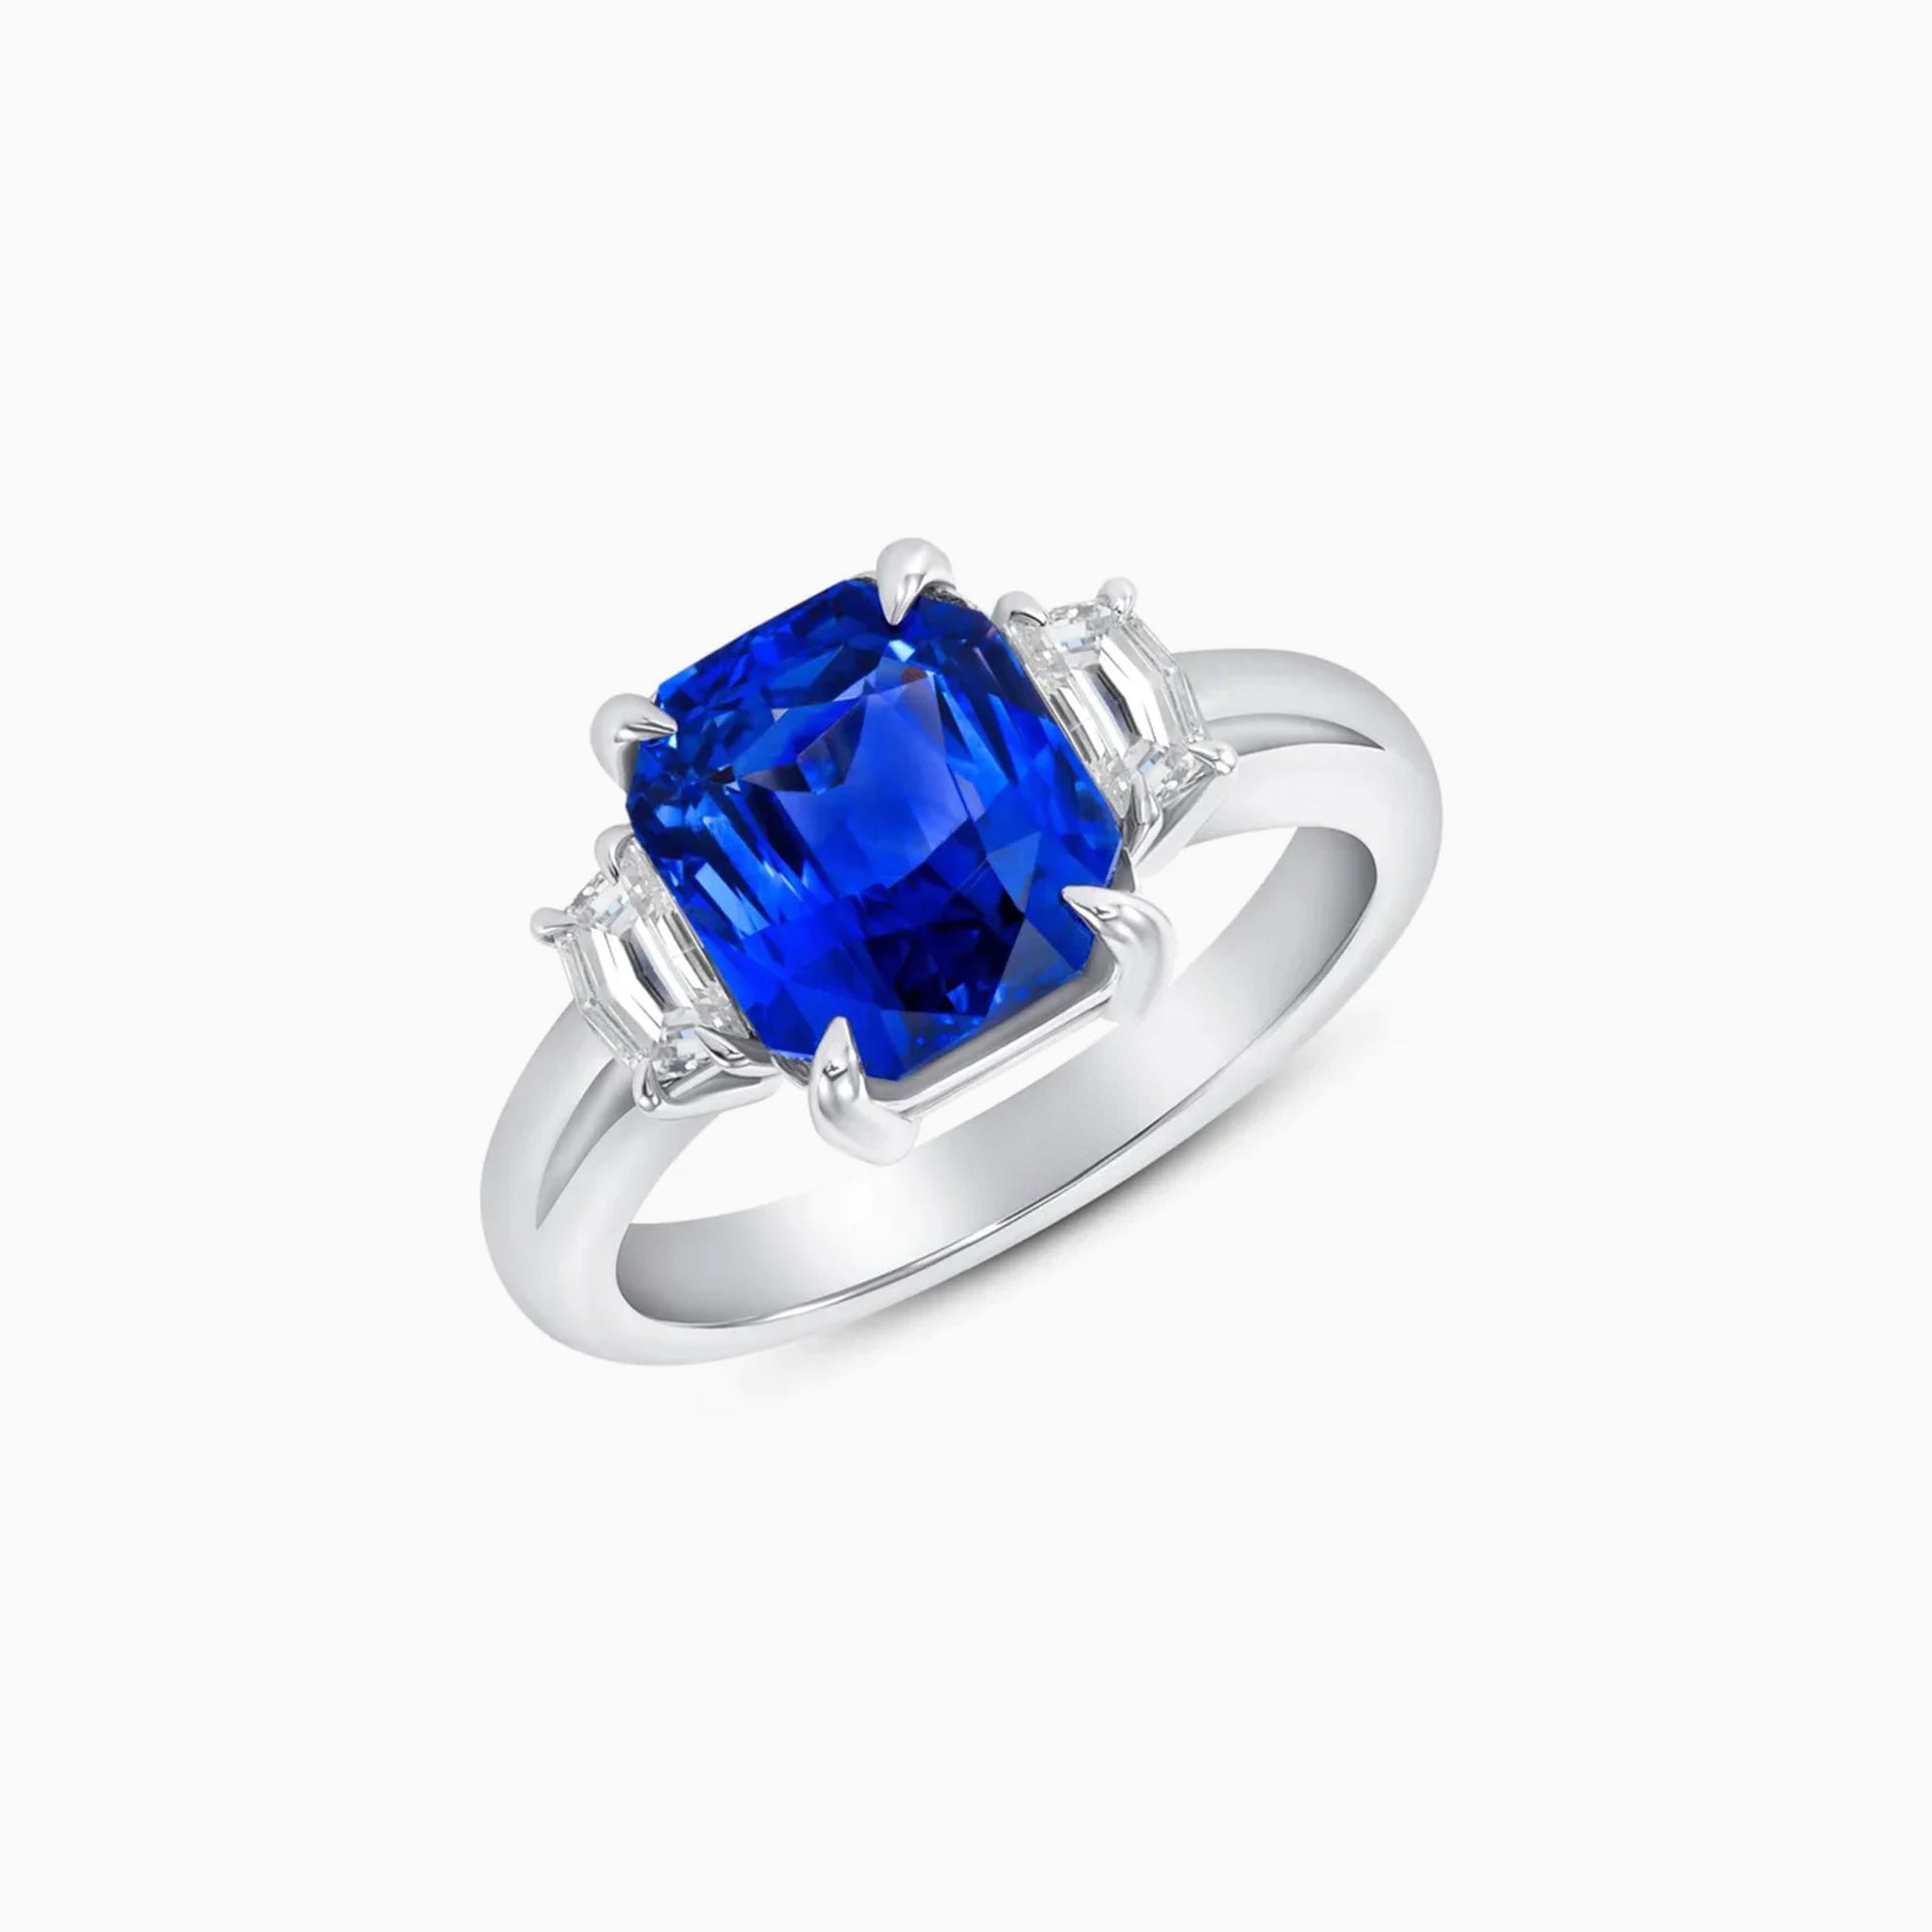 Untreated Sapphire & Diamonds Platinum Ring on a white background